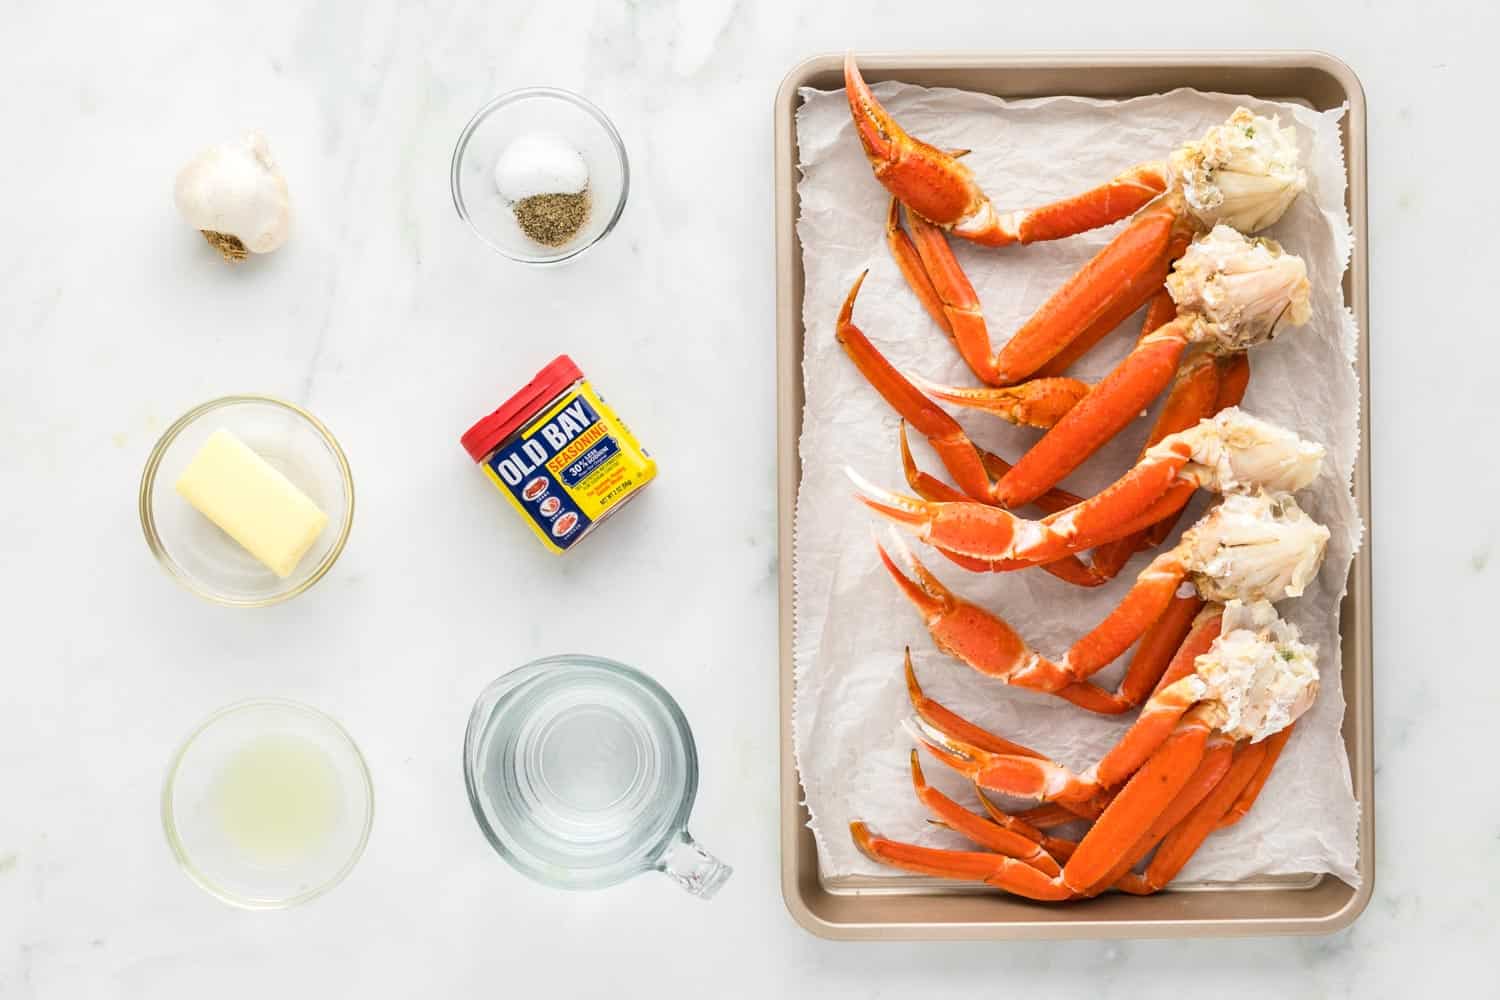 Ingredients needed to cook crab legs and make a dipping sauce